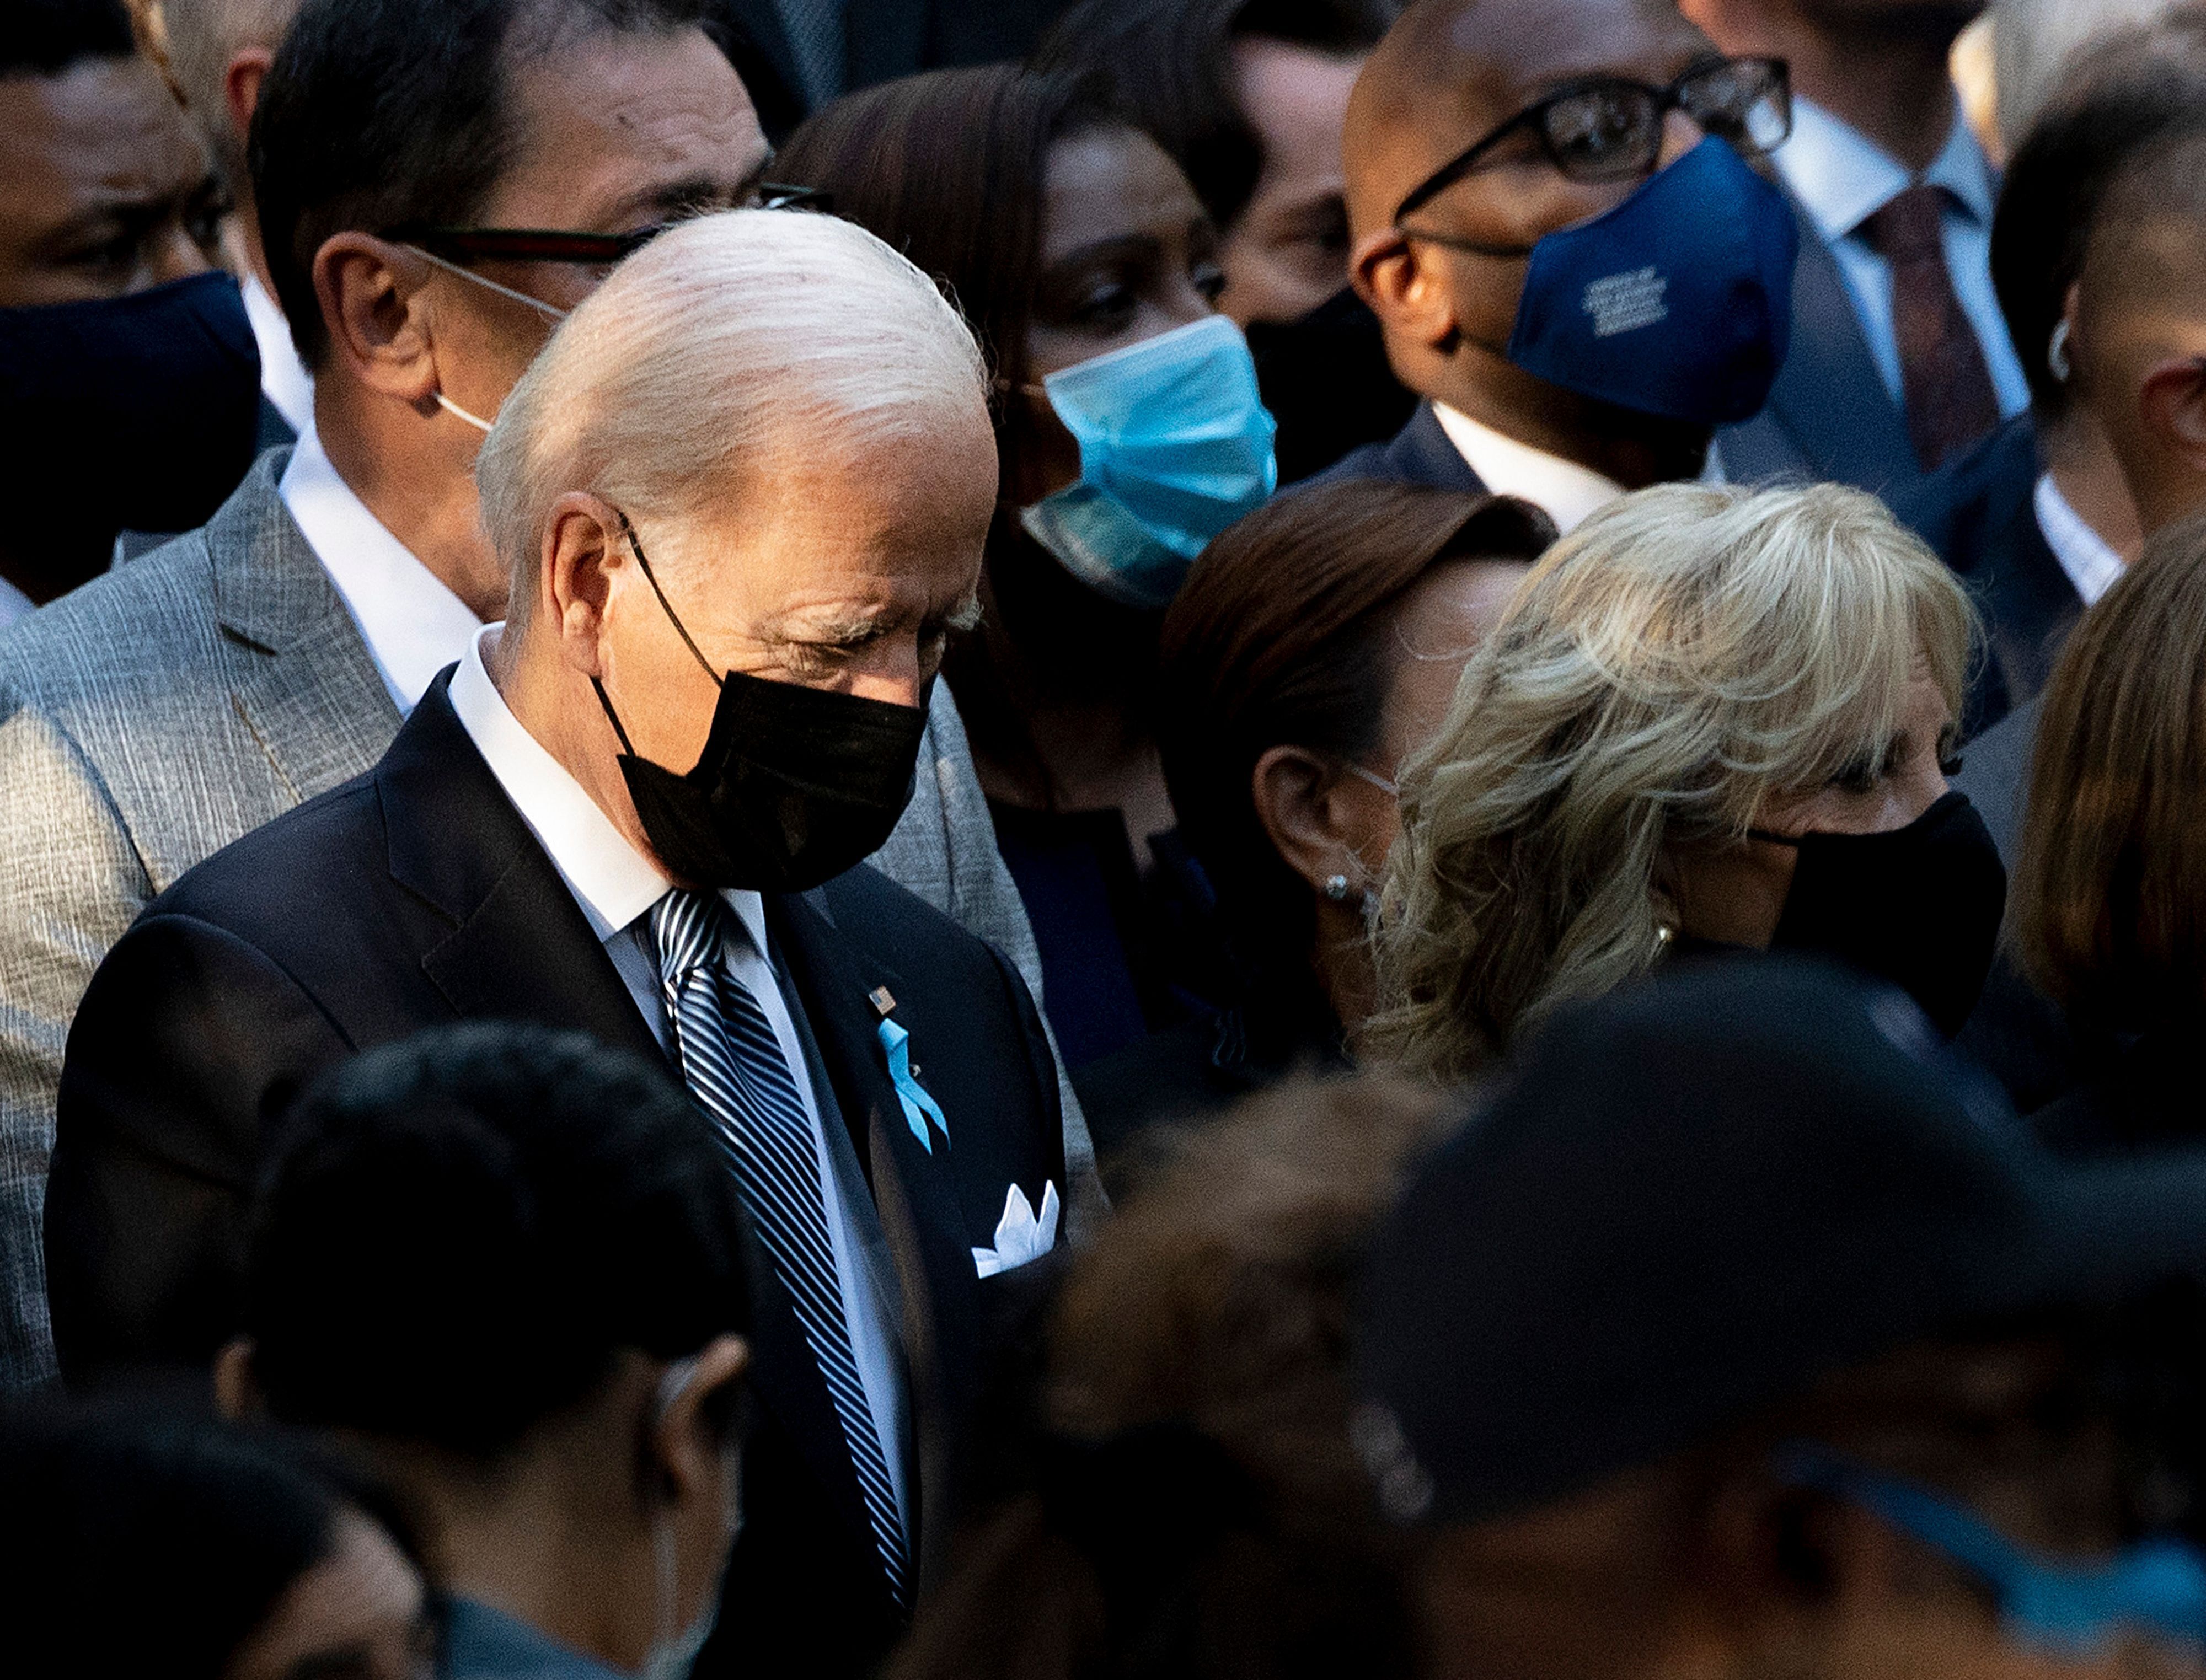 President Joe Biden, with First Lady Jill Biden (R), attends the ceremony at the National 9/11 Memorial marking the 20th anniversary of the 9/11 attacks